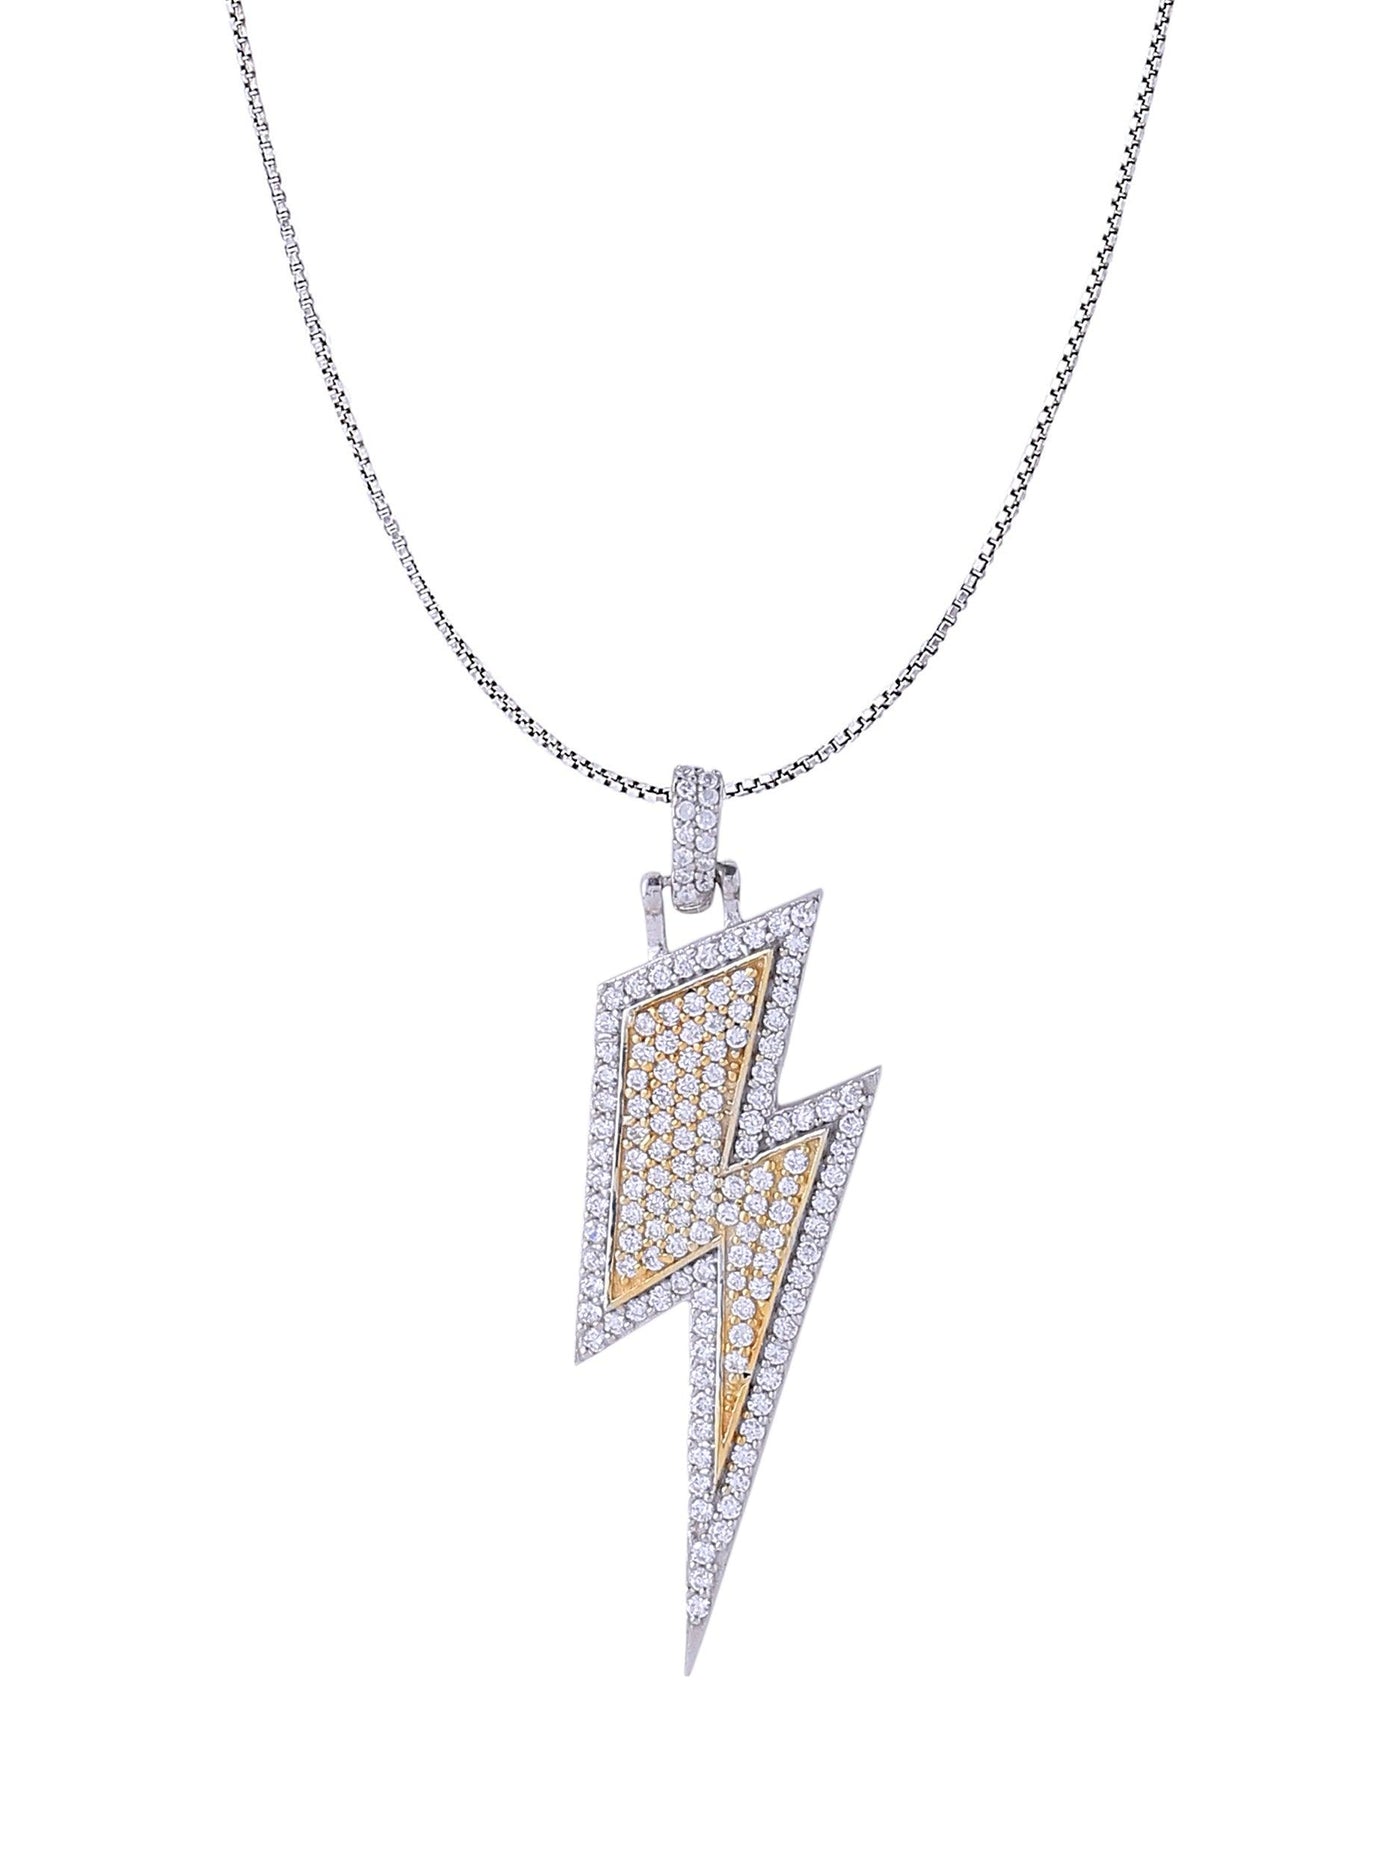 Gold and White Gold Color Flash Pendant Made of 925 Sterling Silver Material with 20 Inch Long Silver Chain